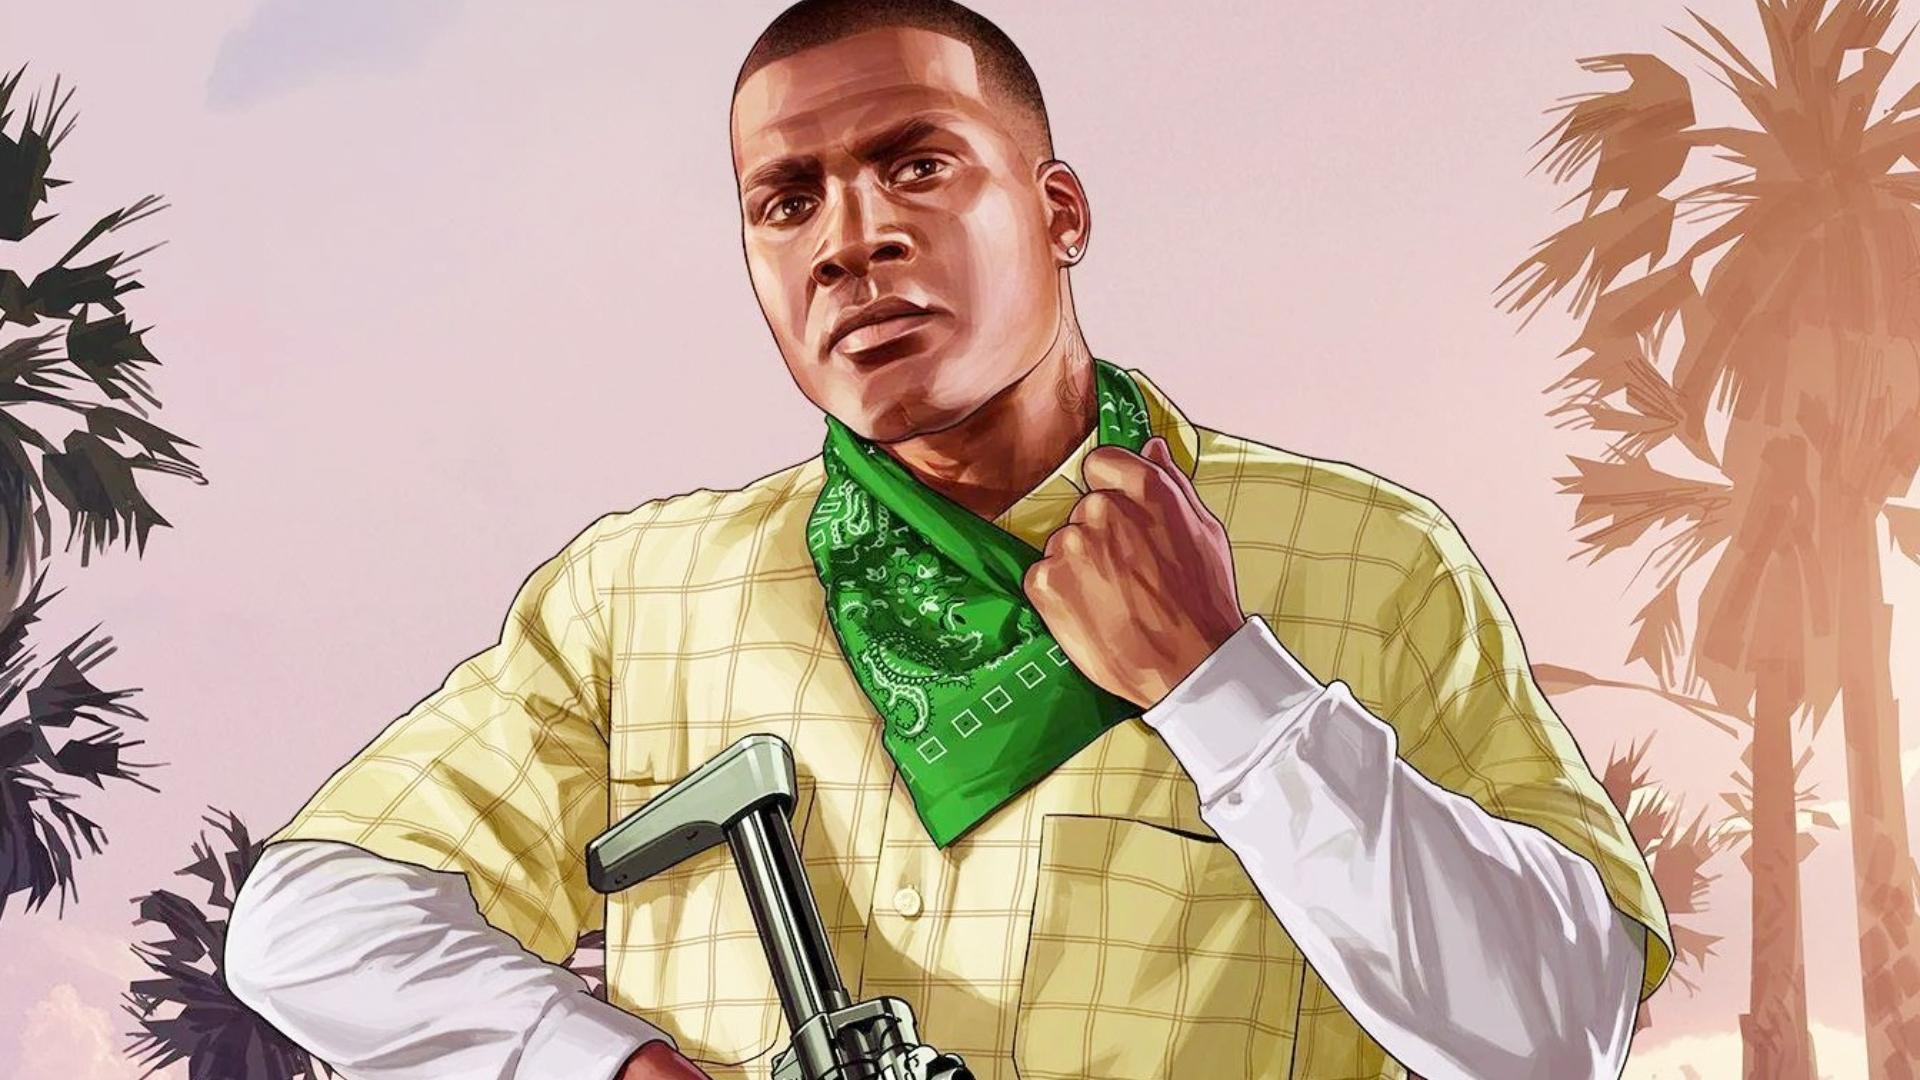 Analysts predict GTA 6 release announcement soon as Take-Two stock